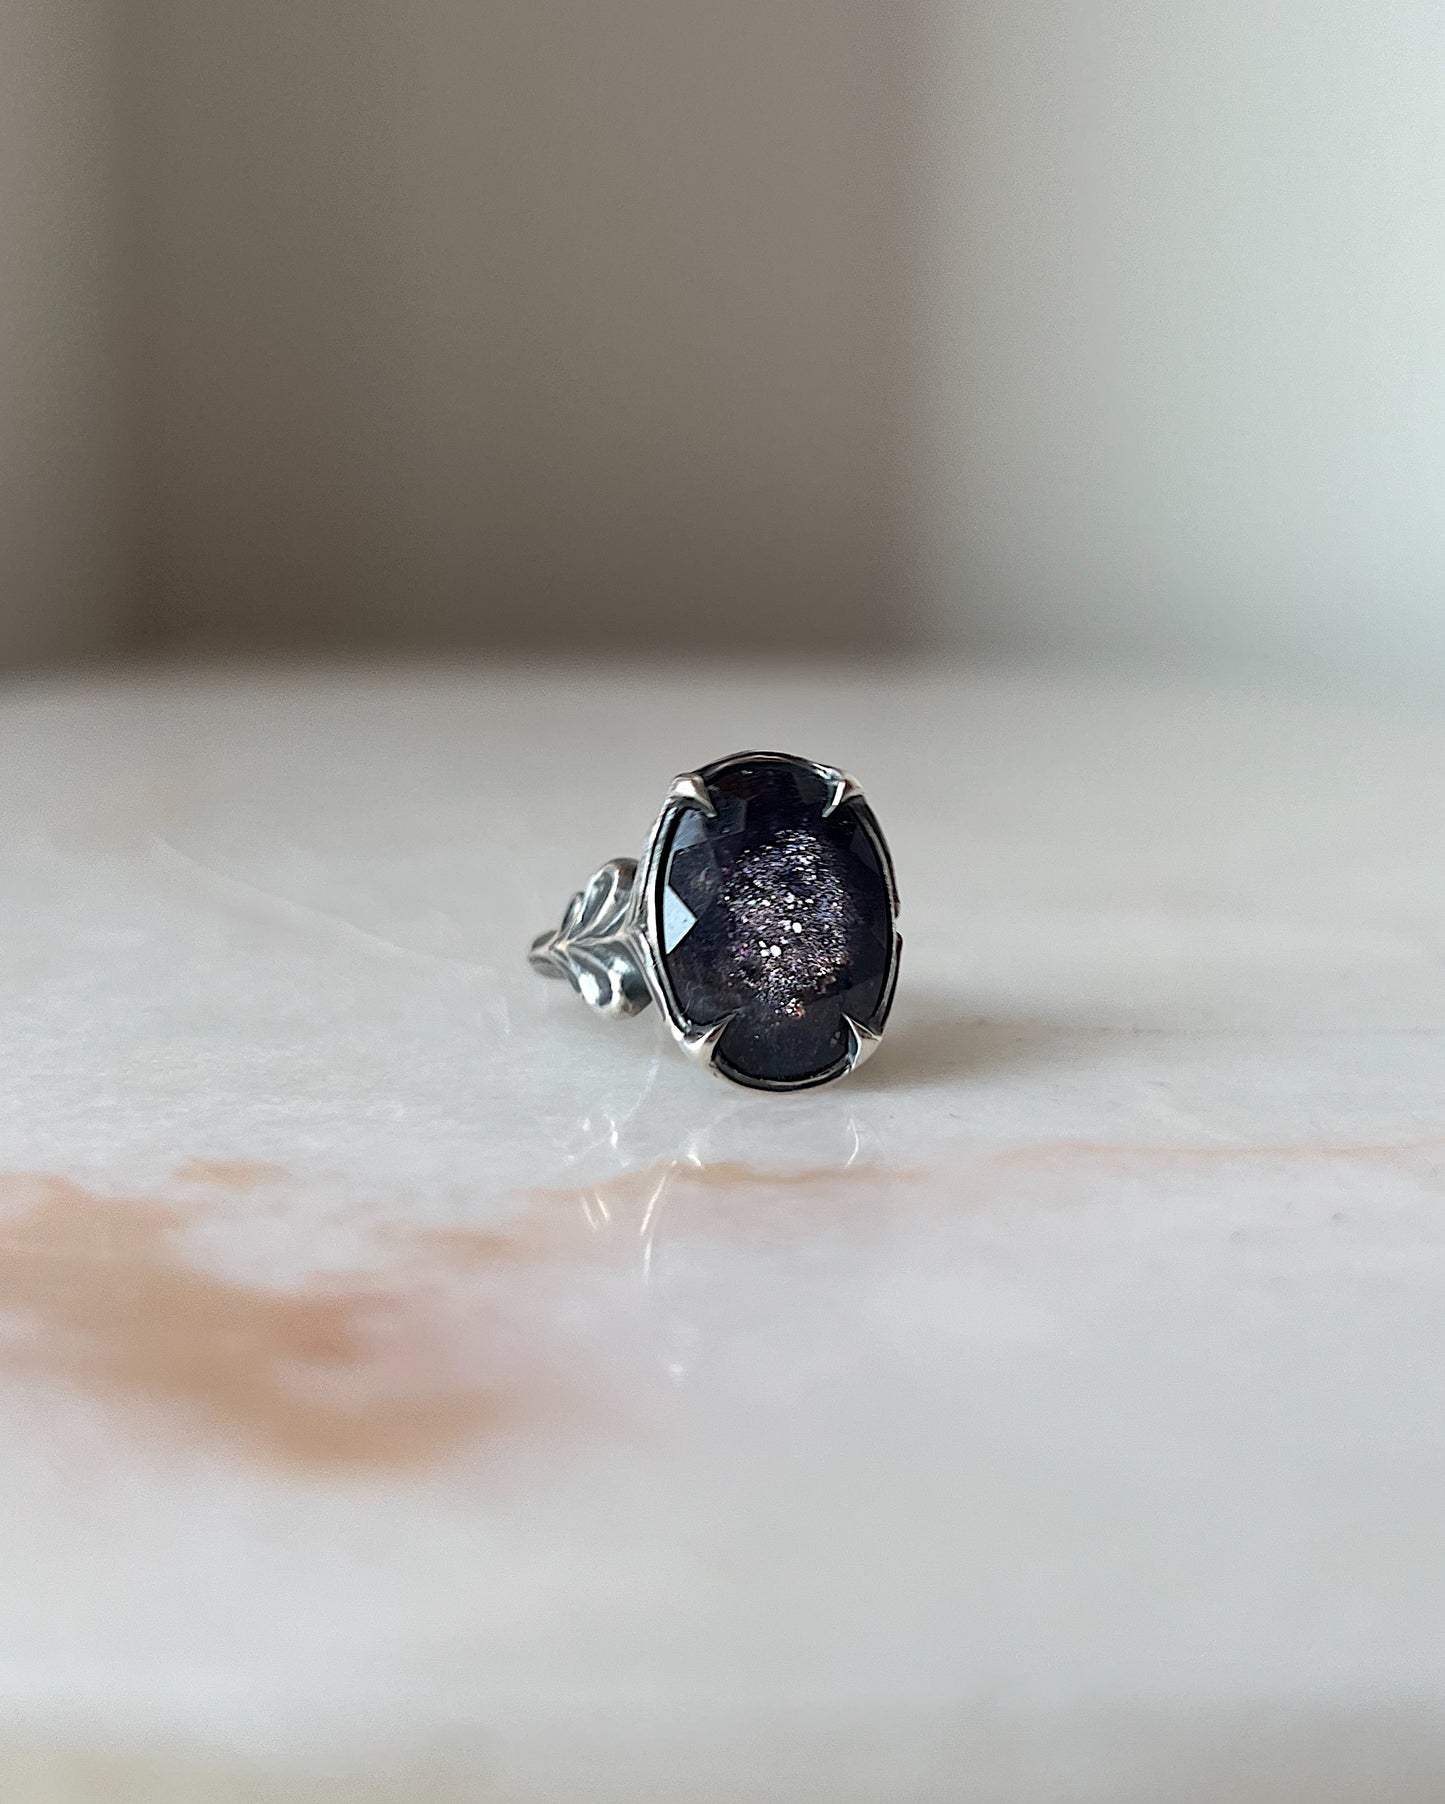 Of the Universe // Bloodshot Iolite Sunstone One of a Kind // Size 7.5